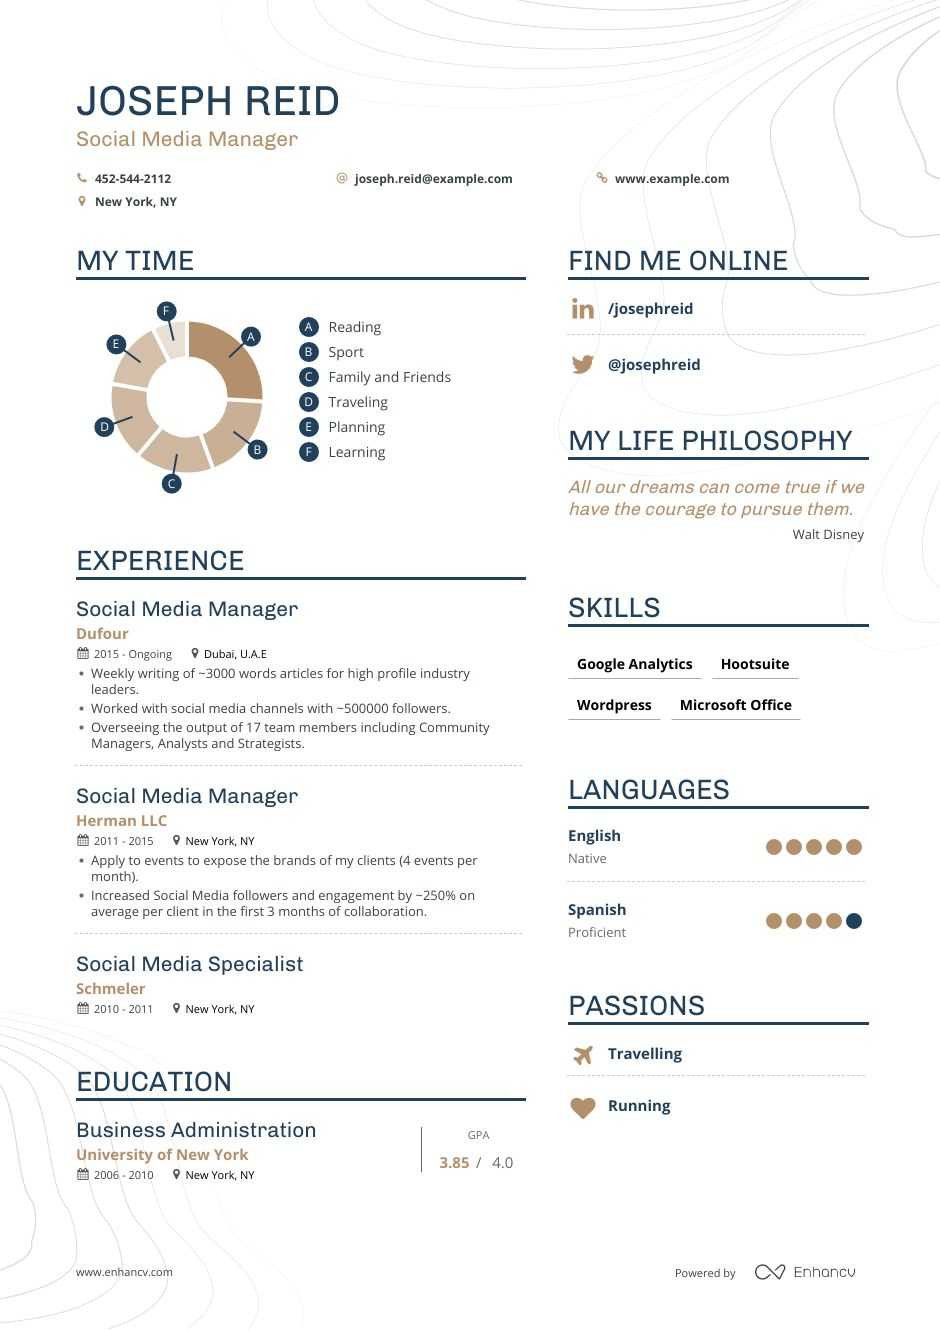 Social Media Manager Resume Examples Skills Templates & More for 2020